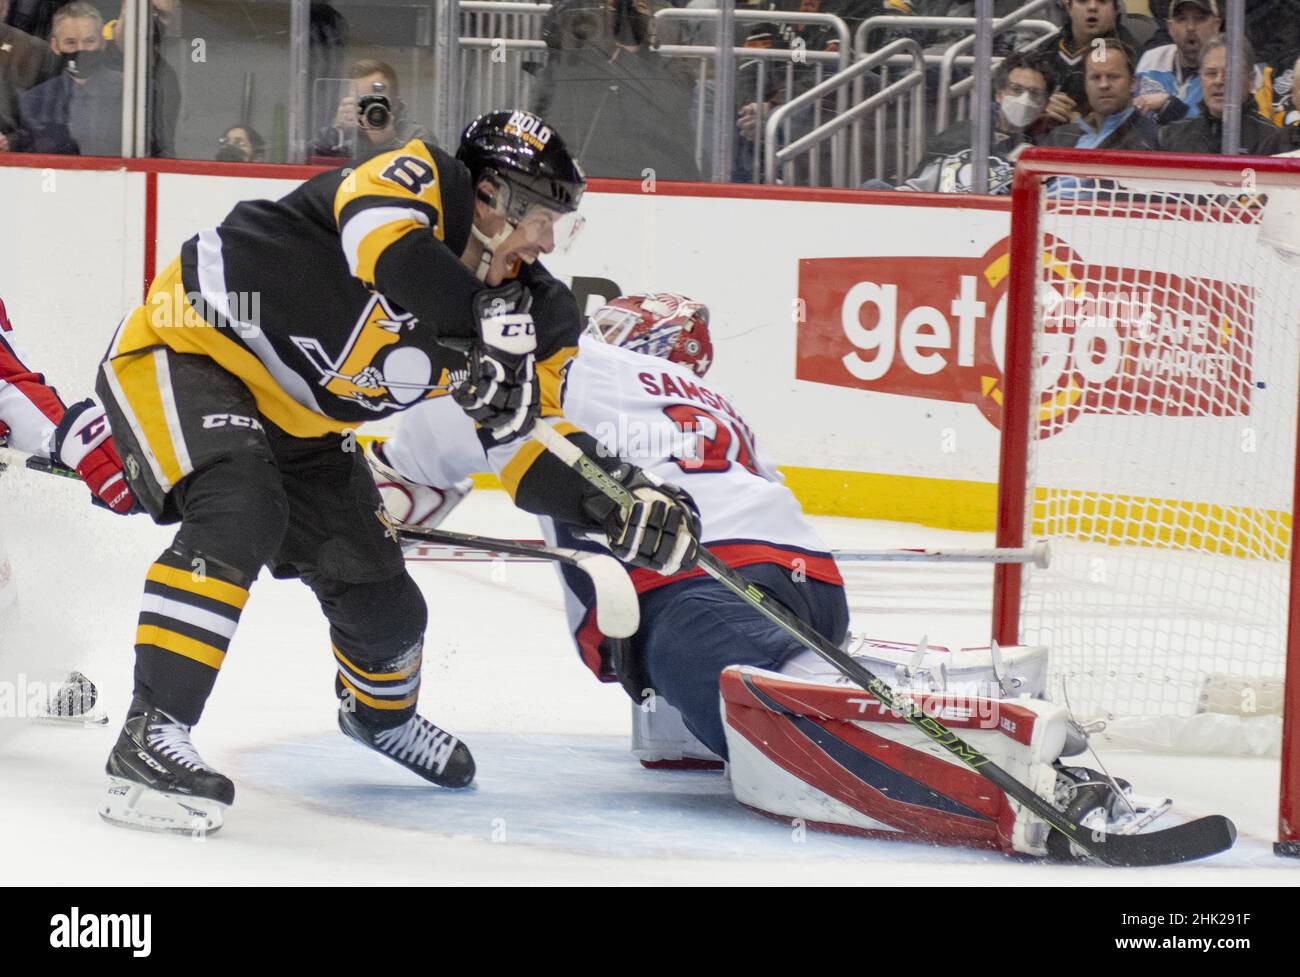 https://c8.alamy.com/comp/2HK291F/pittsburgh-united-states-01st-feb-2022-pittsburgh-penguins-center-sidney-crosbys-87-shot-bounces-off-the-post-during-overtime-of-the-washington-capitals-4-3-win-against-the-pittsburgh-penguins-at-ppg-paints-arena-in-pittsburgh-on-tuesday-february-1-2022-photo-by-archie-carpenterupi-credit-upialamy-live-news-2HK291F.jpg